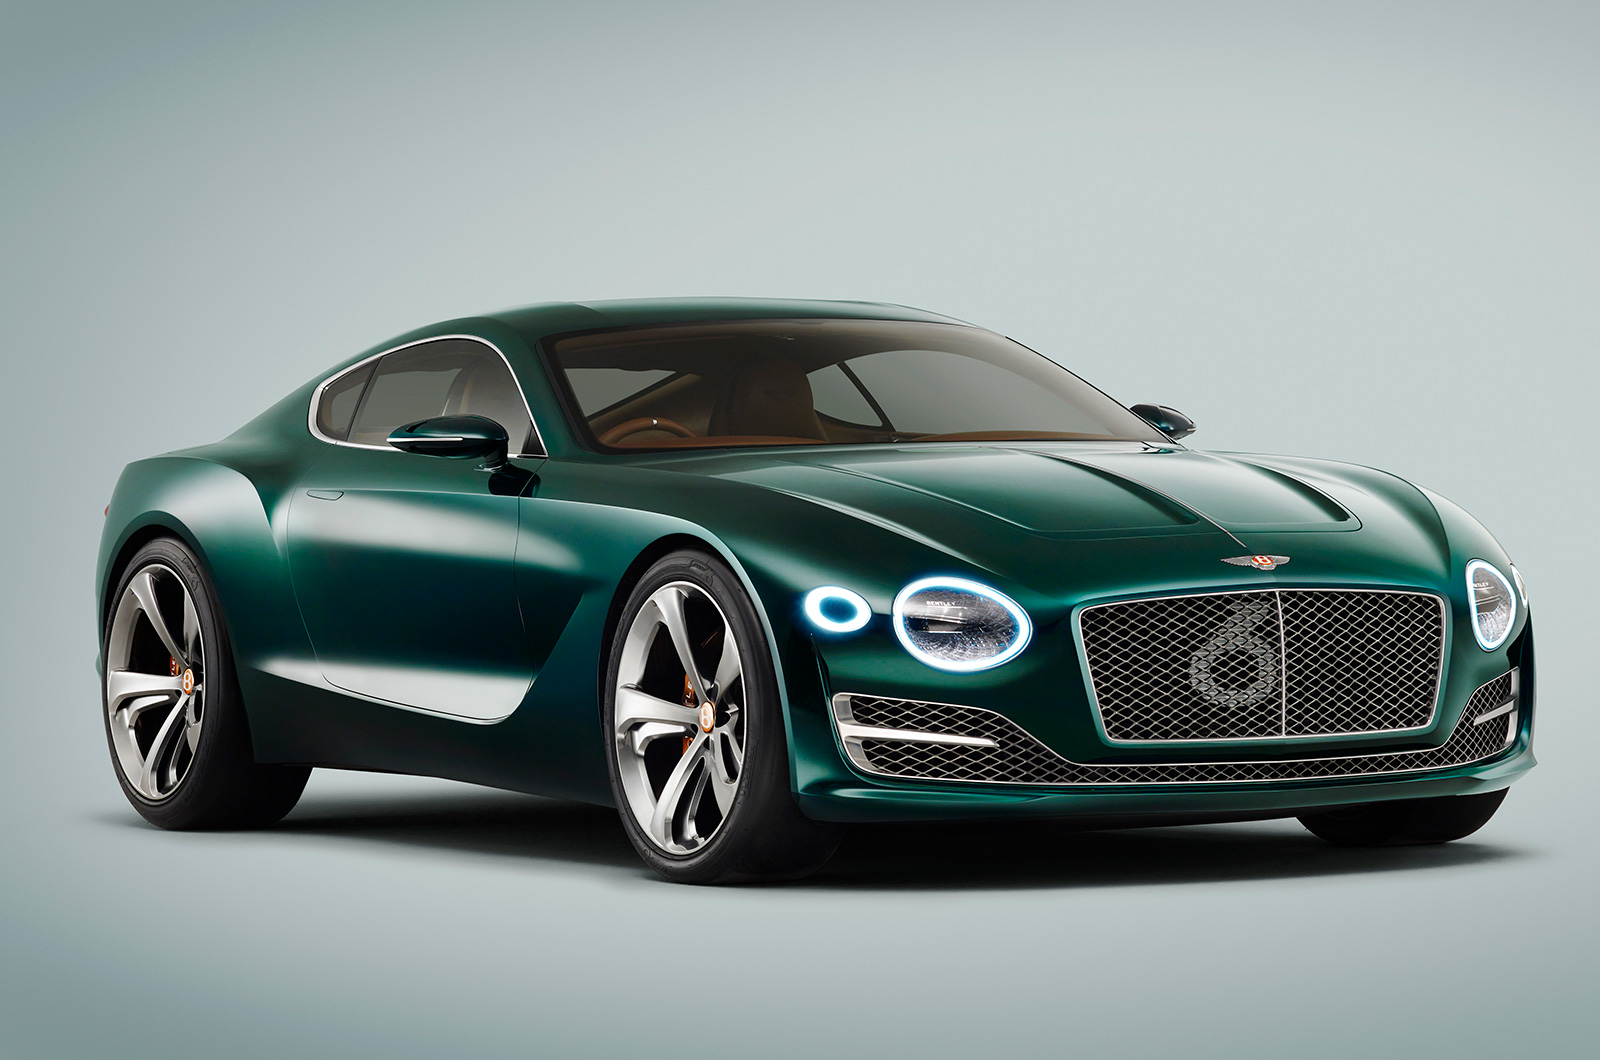 <p>Created to take Bentley head to head with <strong>Aston Martin</strong>, the EXP 10 Speed 6 was a two-seater hybrid coupe concept that would compete with the <strong>Vantage V8</strong>. Engineered to accommodate a regular V8 engine or a plug-in hybrid powertrain, the EXP 10 Speed 6 would take Bentley into previously uncharted territory. And so far, it's still uncharted…</p>